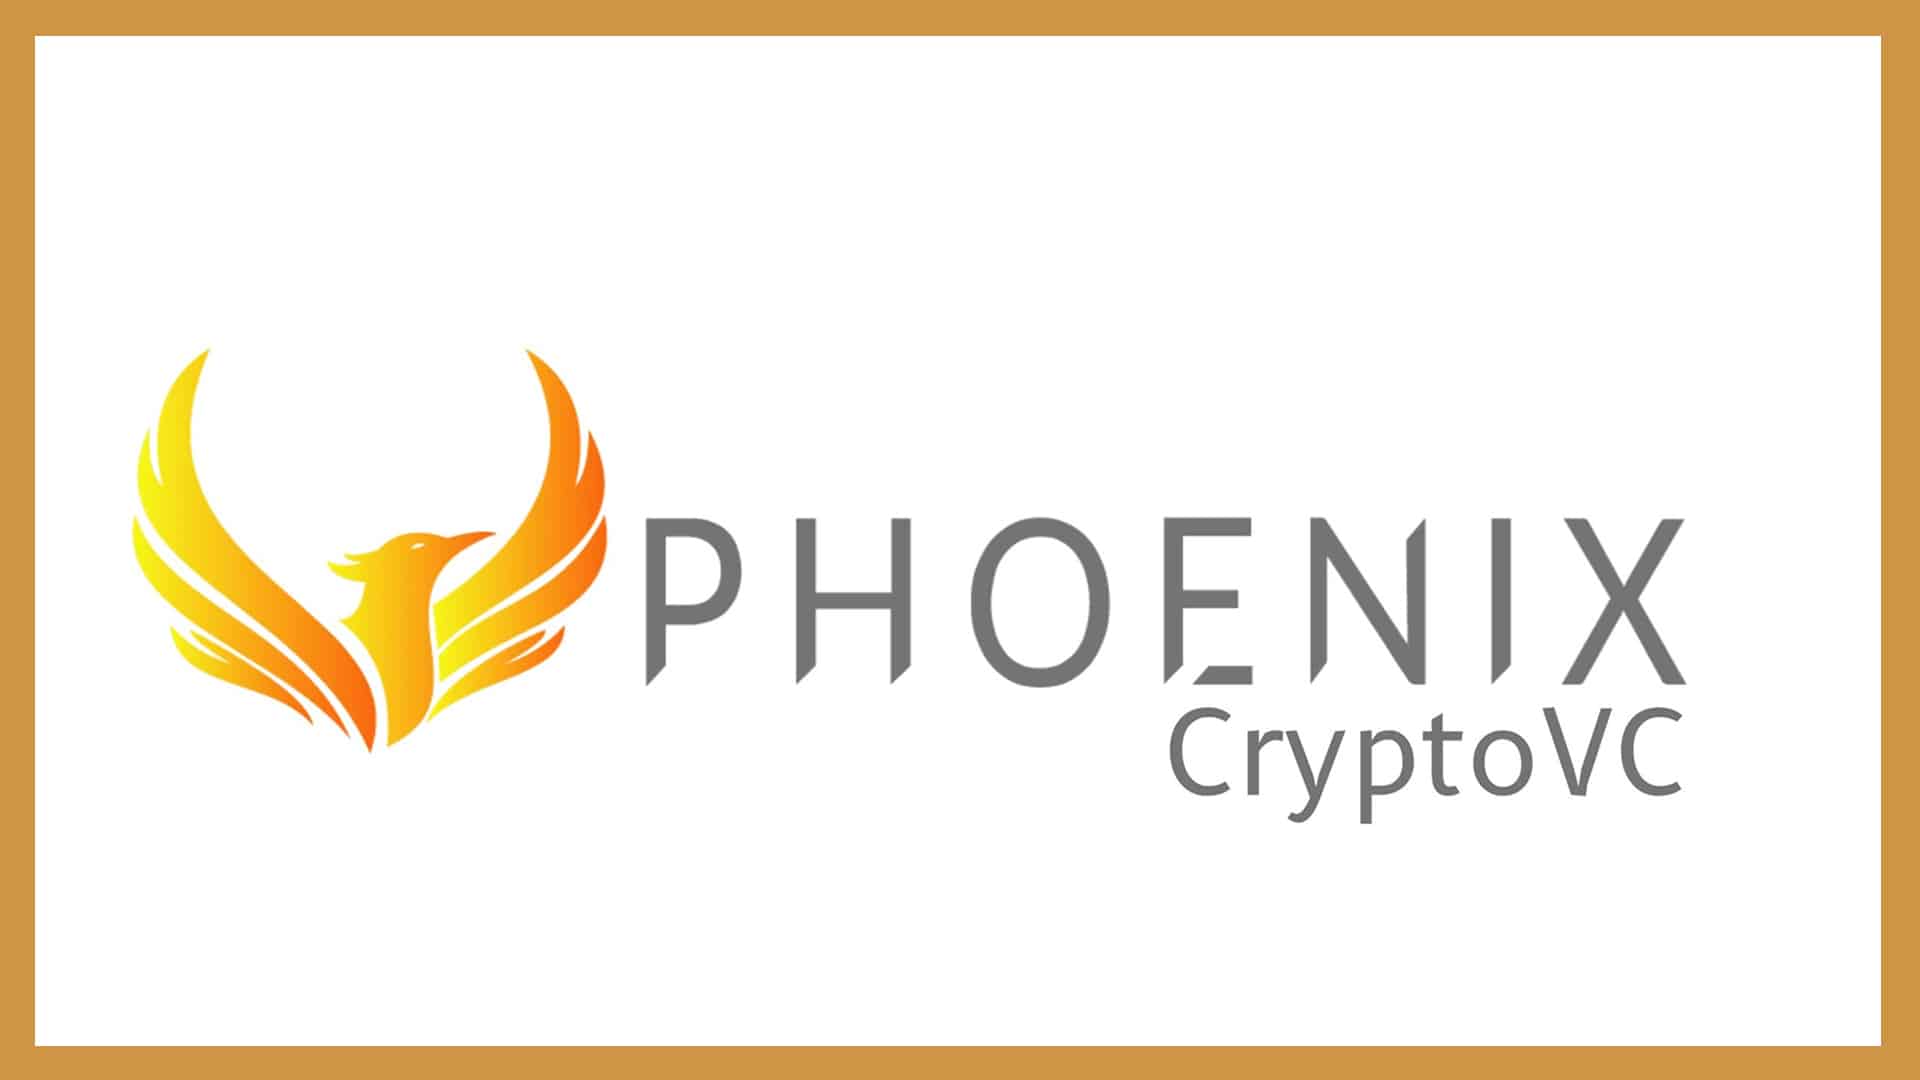 Crypto Venture Capital Firm Phoenix VC Announces Seed Investment in Predictr.club, The World's First P2P ERC20 Prediction Platform